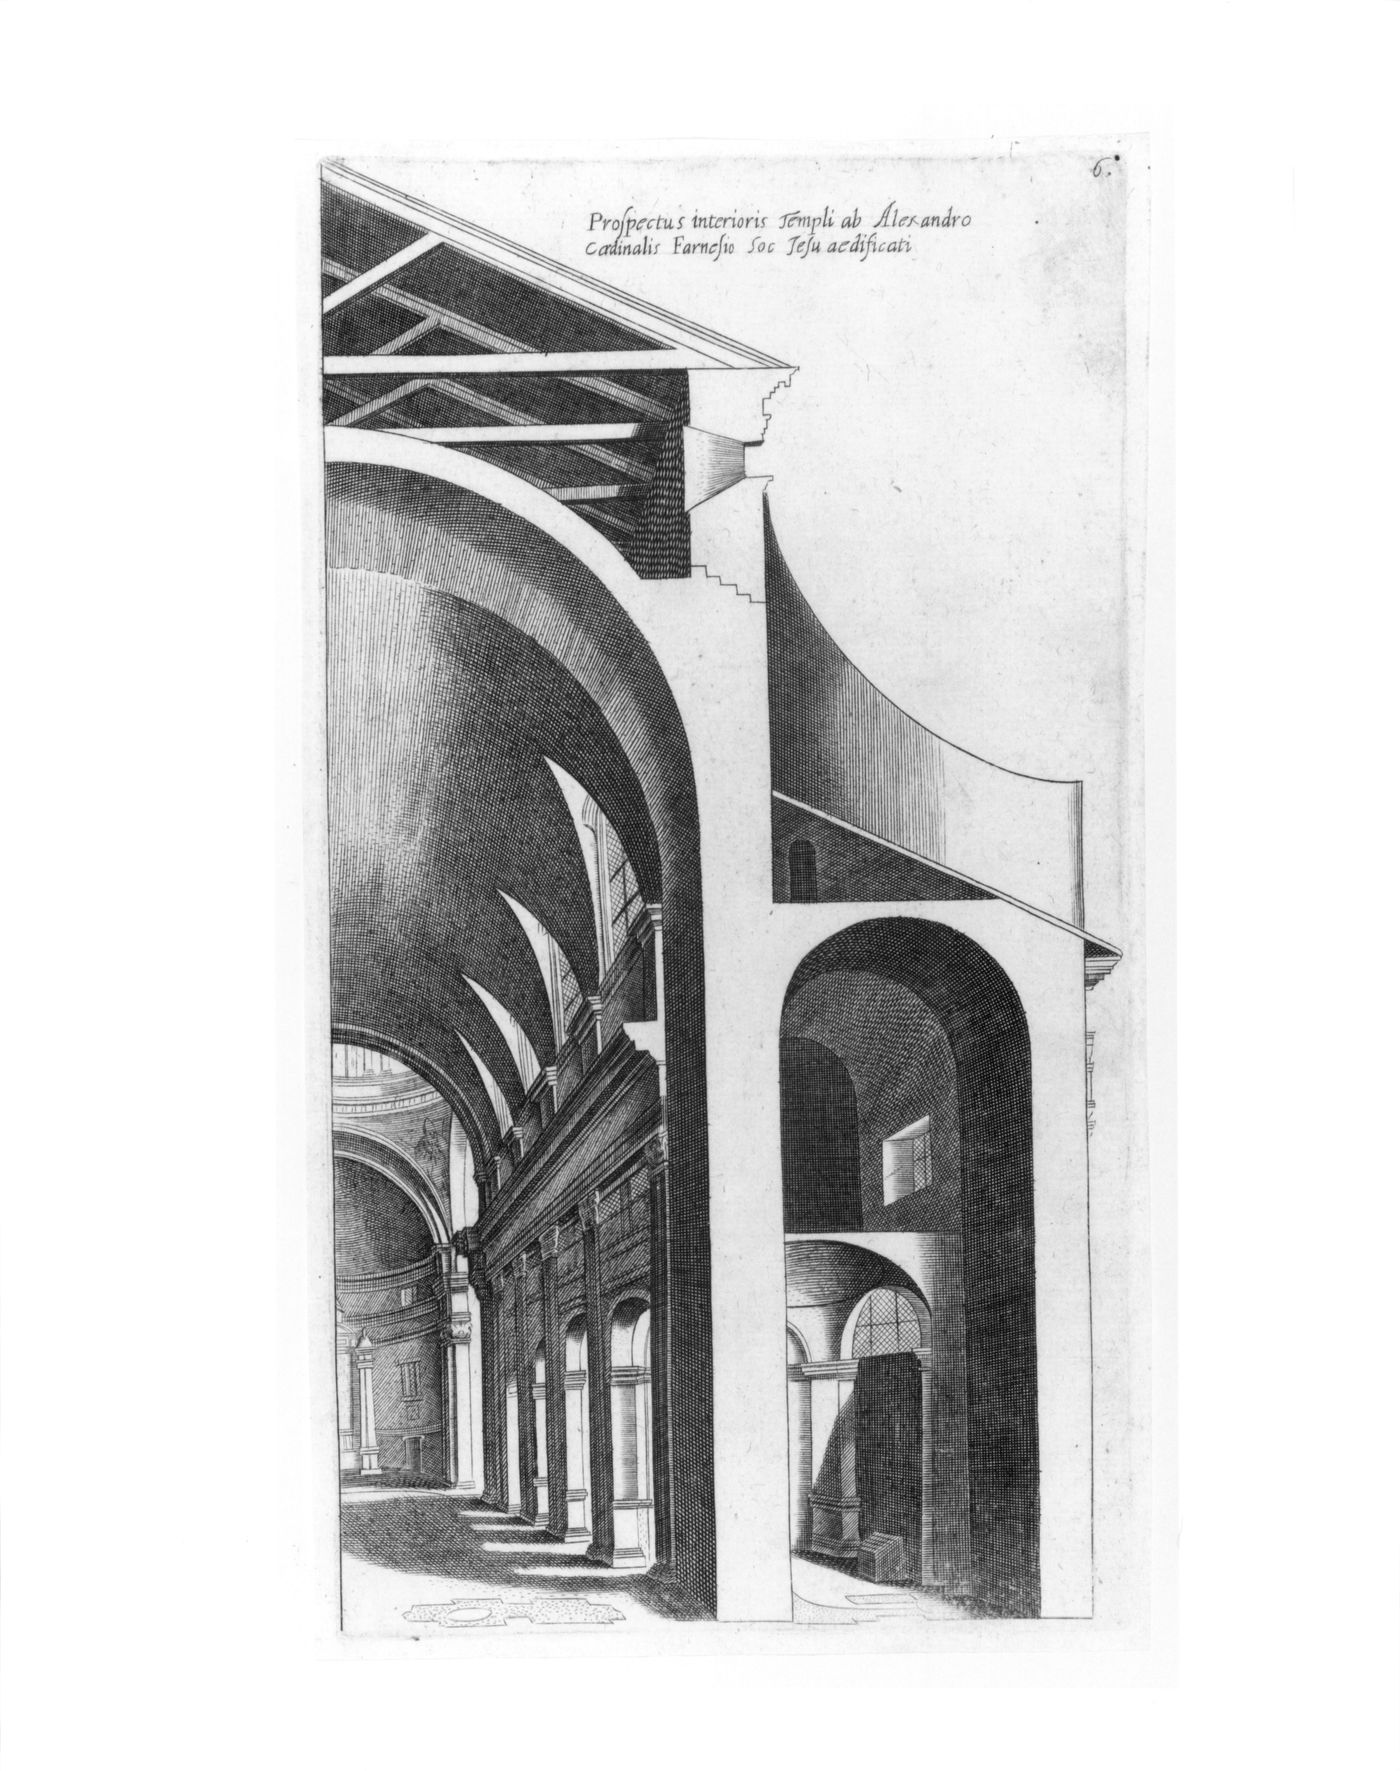 Half-section with perspective view of Il Gesù, Rome